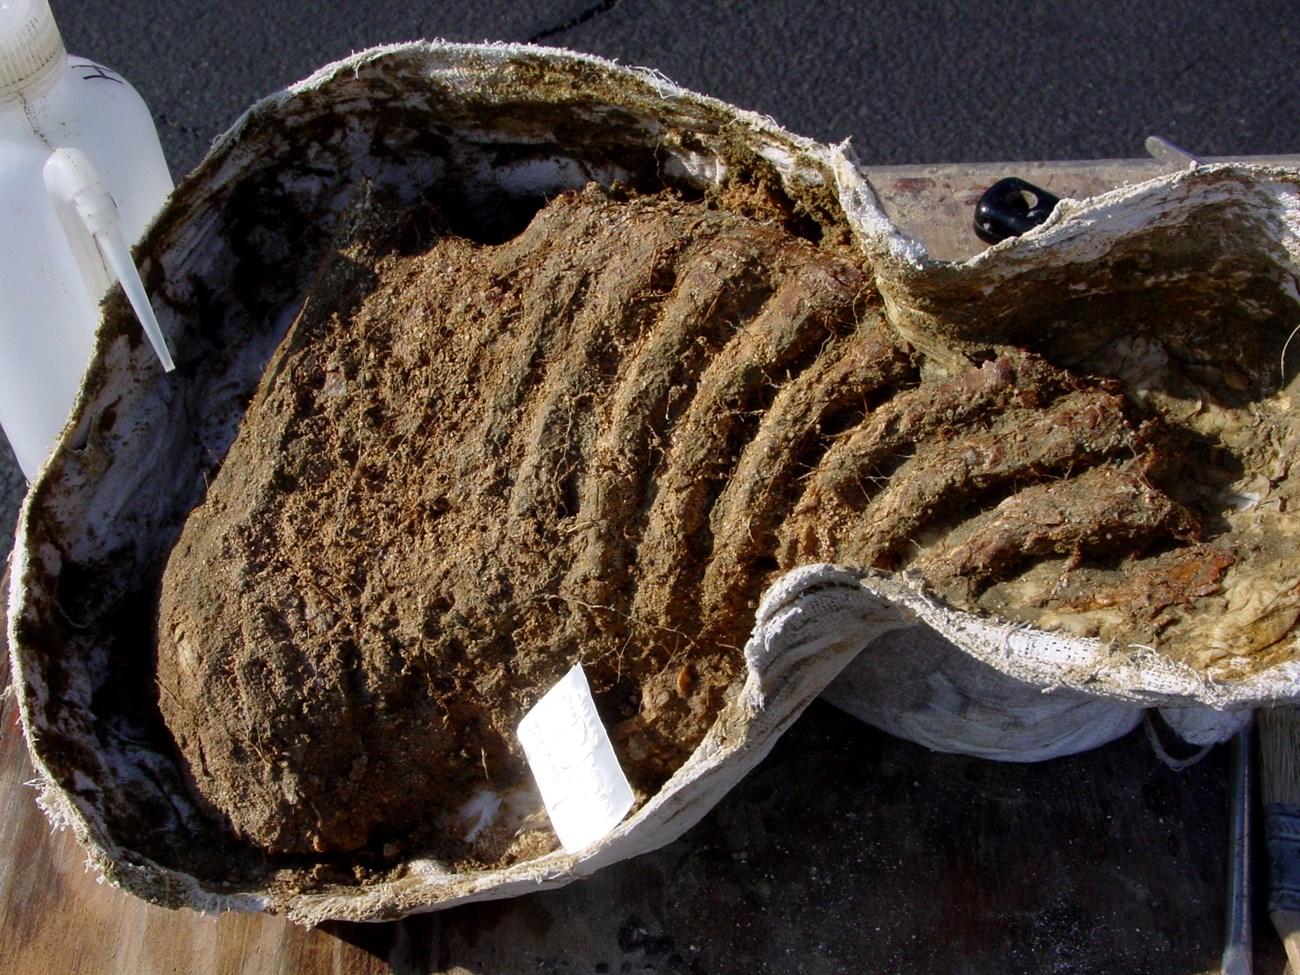 A fossilized mammoth tooth wrapped in plastic. The tooth itself looks like a rib cage of parallel lines.